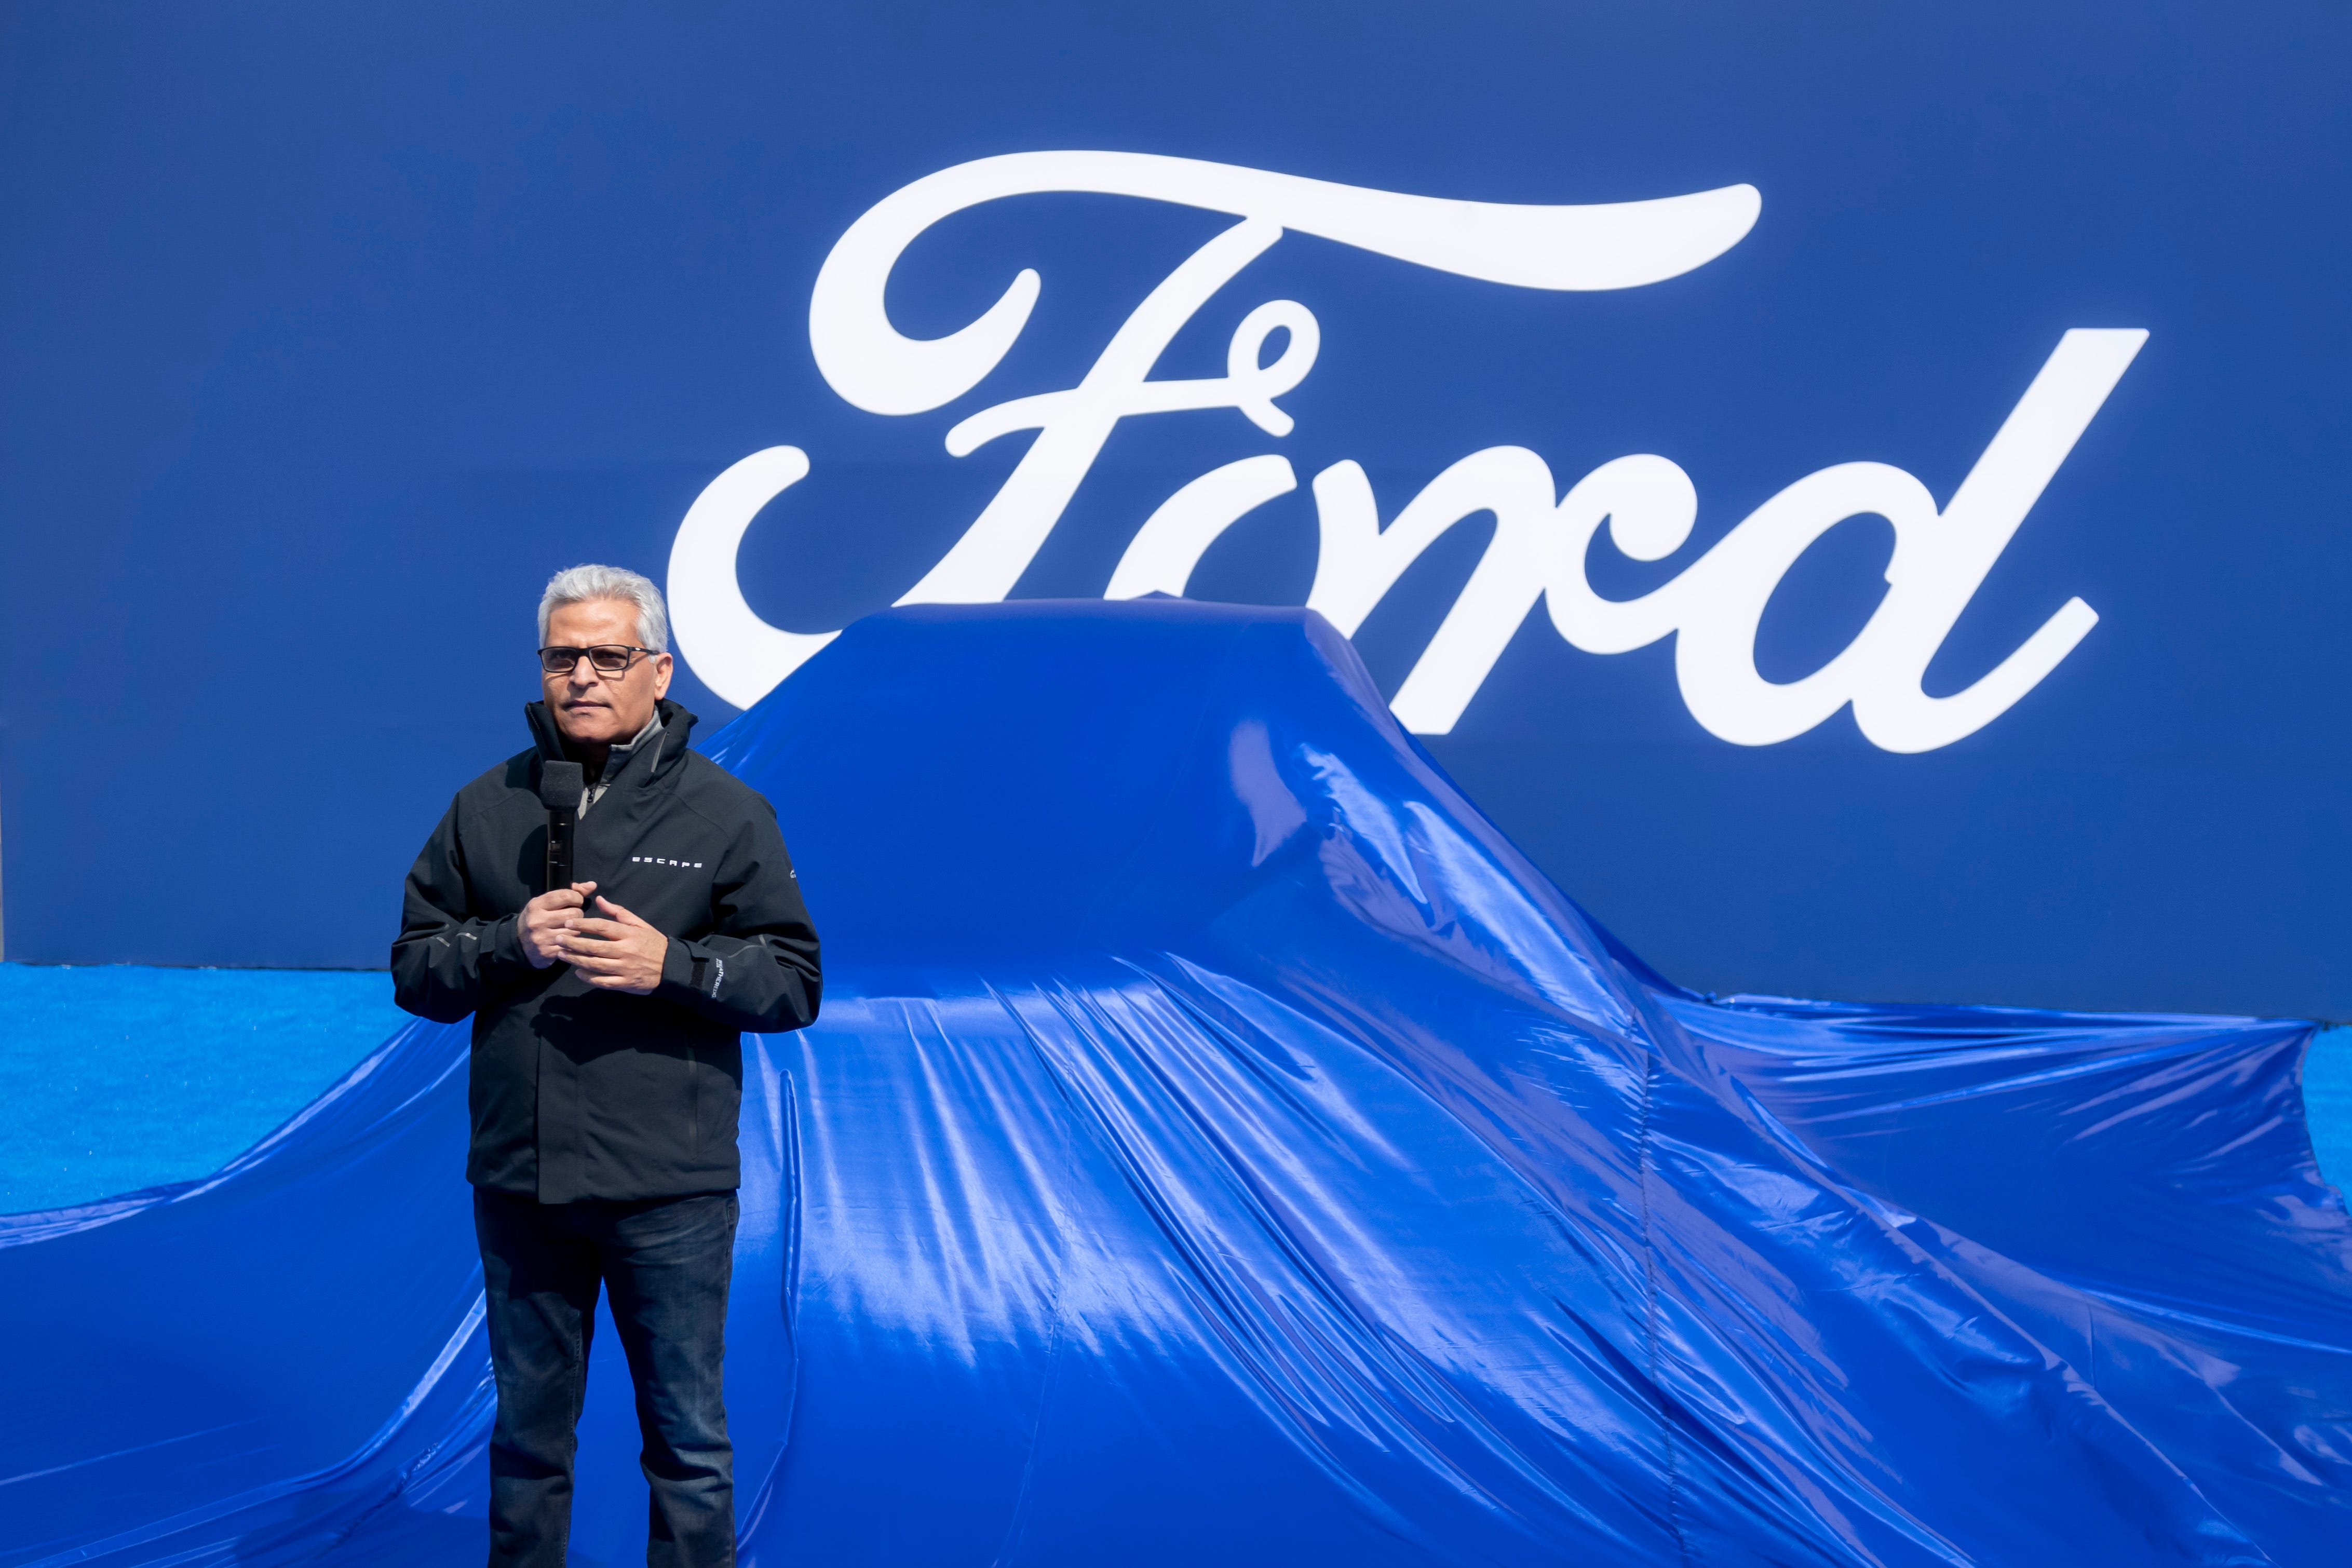 Kumar Galhotra, president of Ford North America, speaks during the reveal of the 2020 Ford Escape, at Greenfield Village, in Dearborn, March 28, 2019.